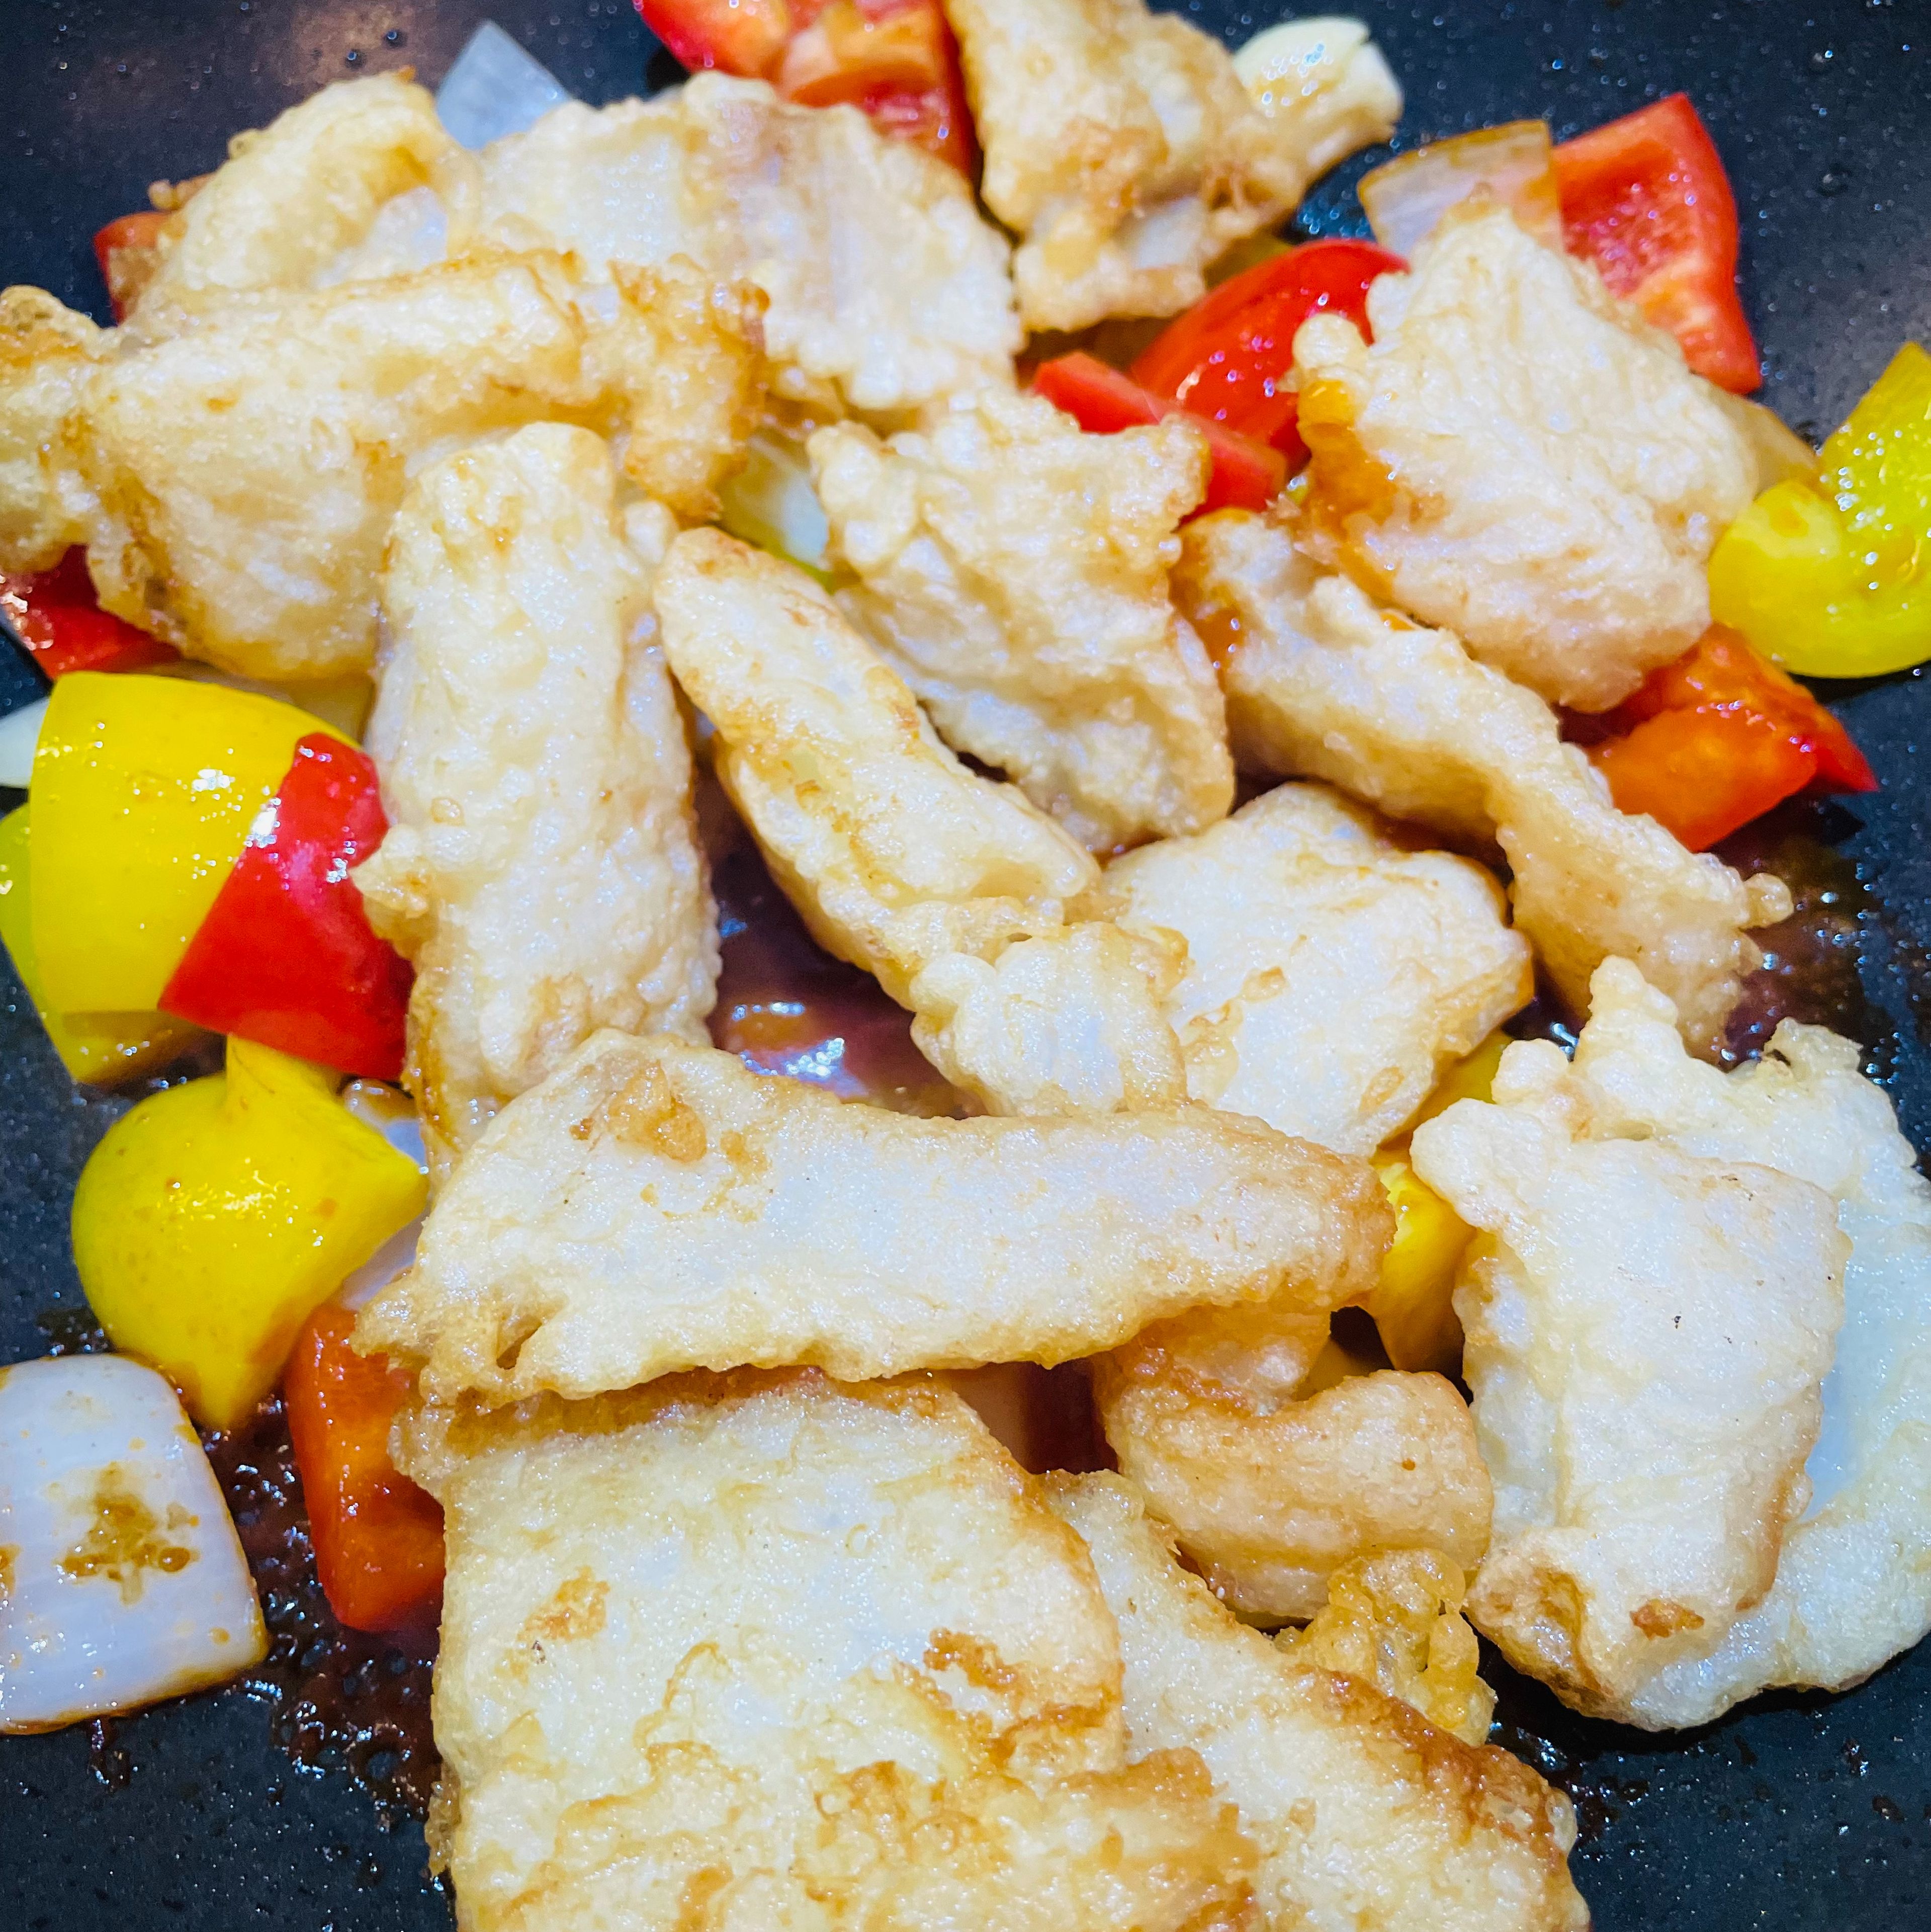 Put back fried fish to the pan and mix it well 